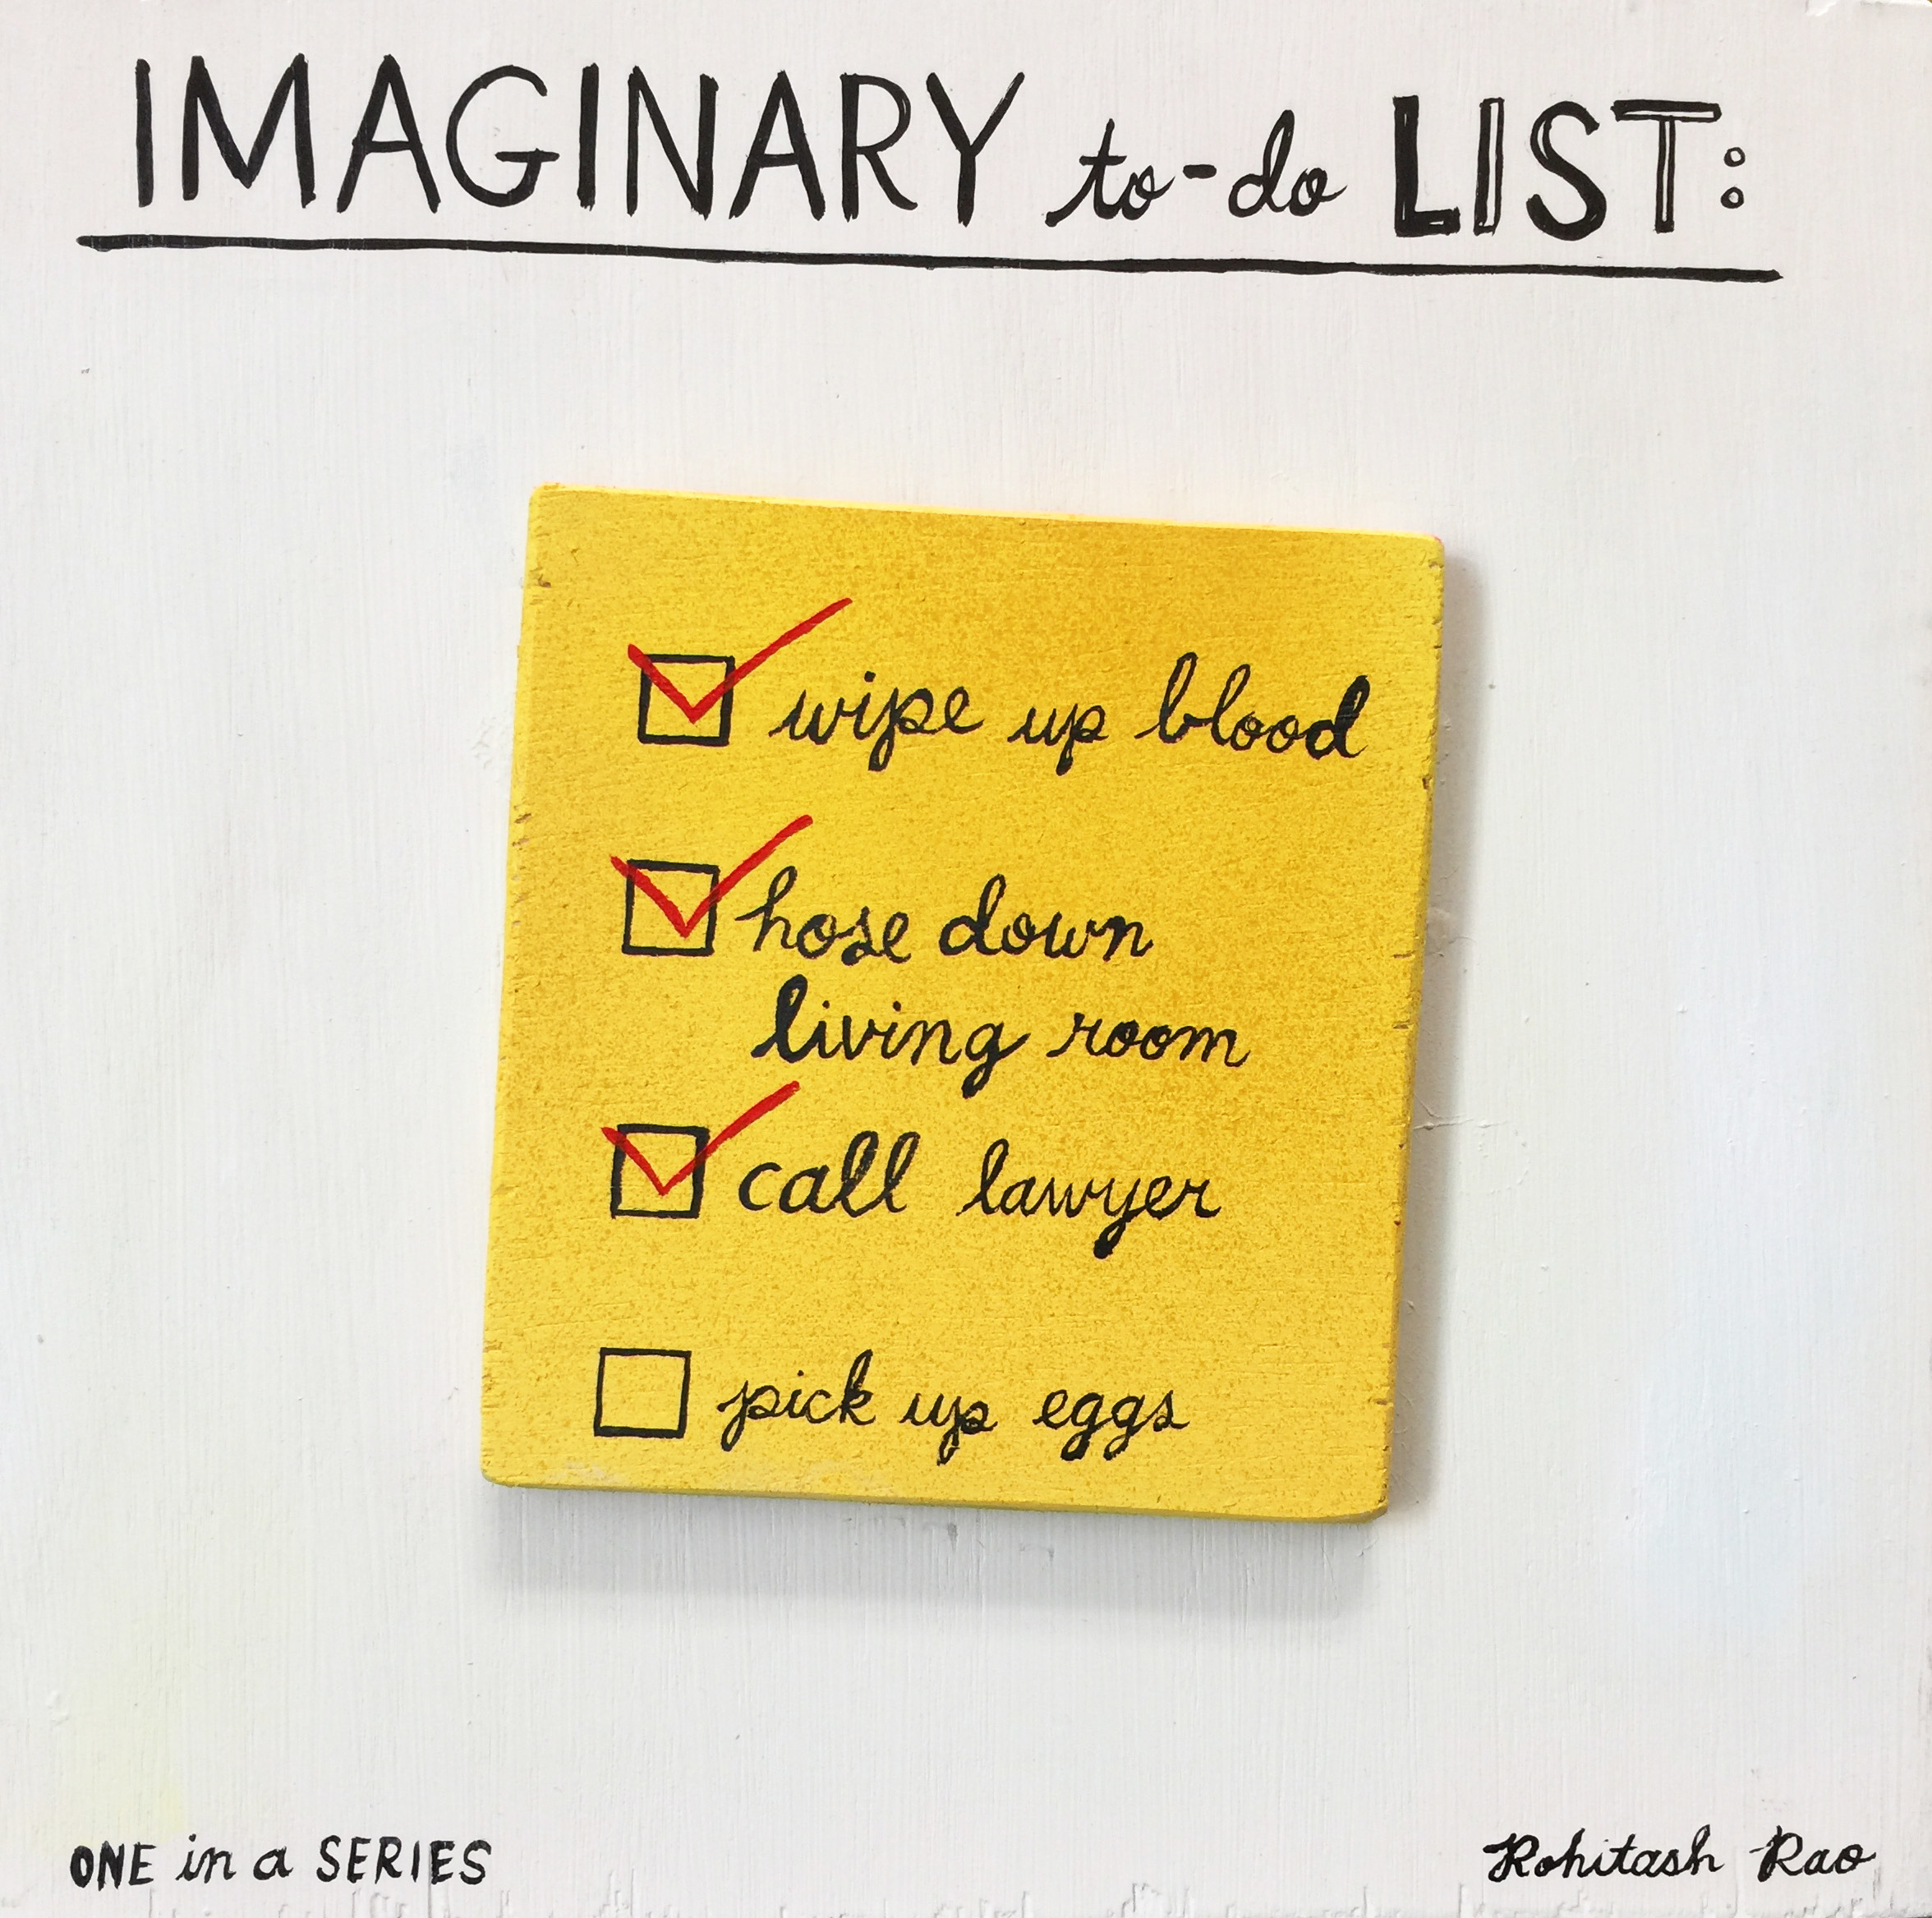 IMAGINARY TO-DO LIST (one in a series)